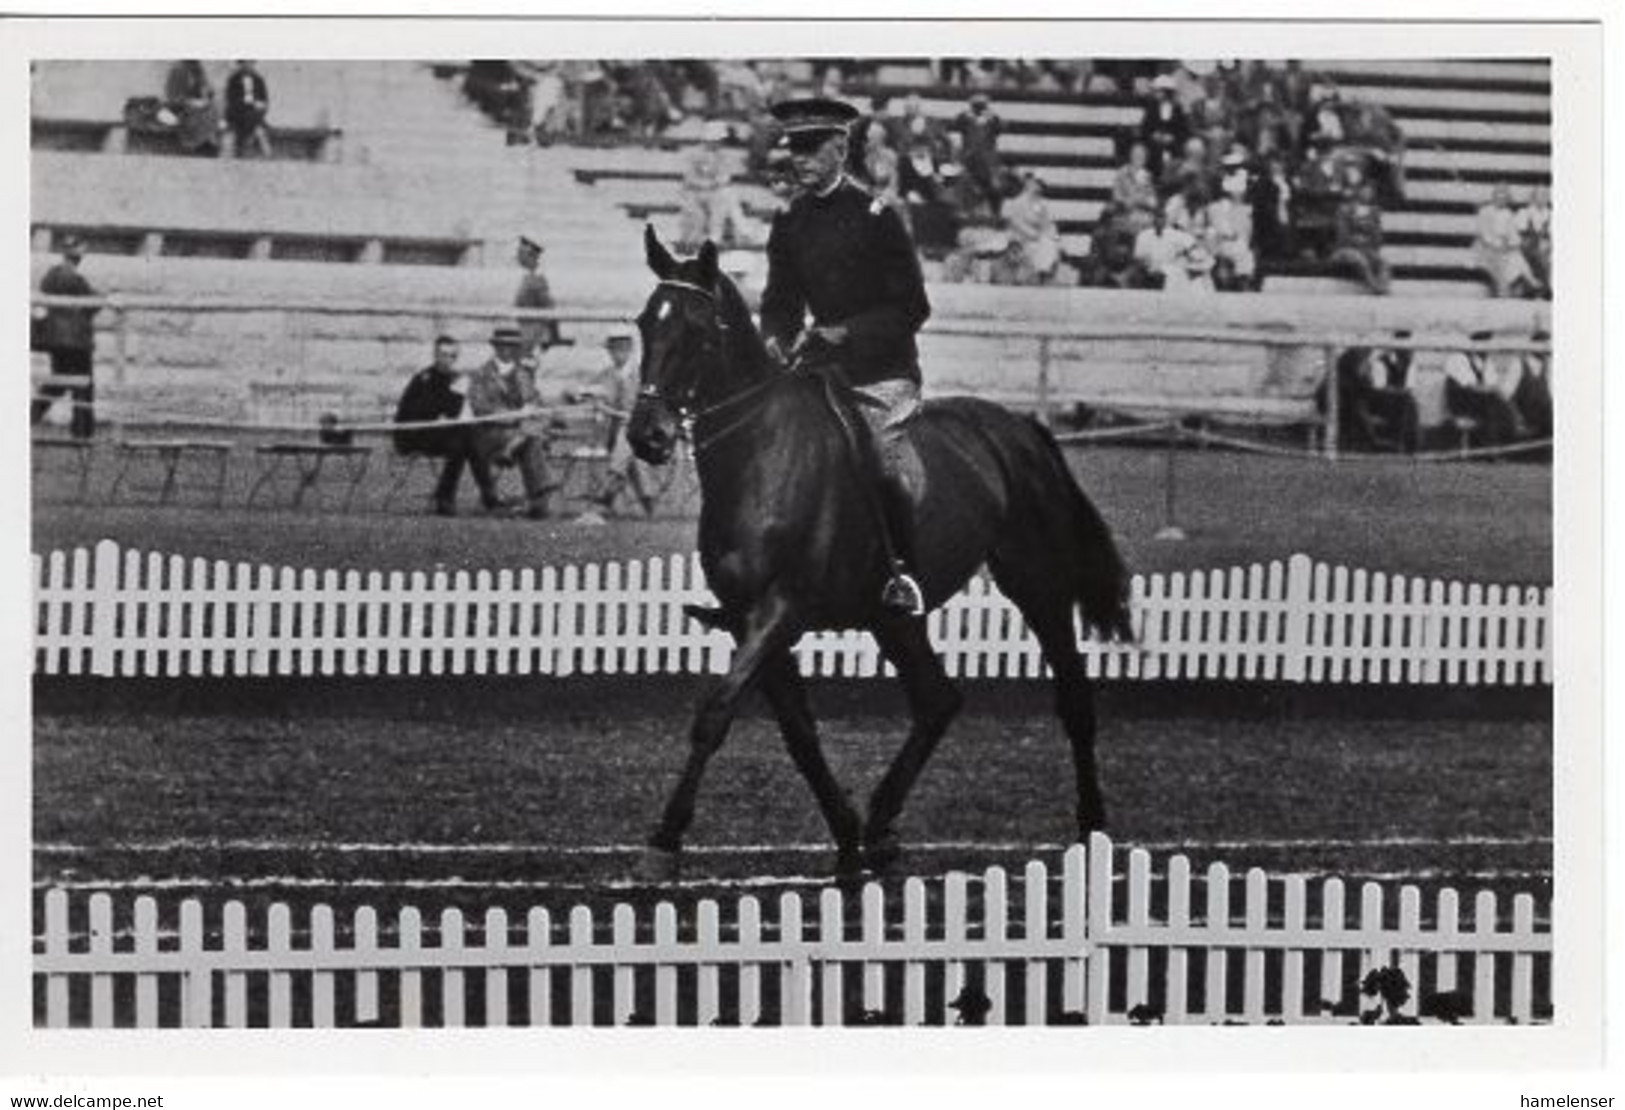 51794 - Deutsches Reich - 1936 - Sommerolympiade Berlin - USA, "Olympic" Unter Capt. Babcock - Horse Show